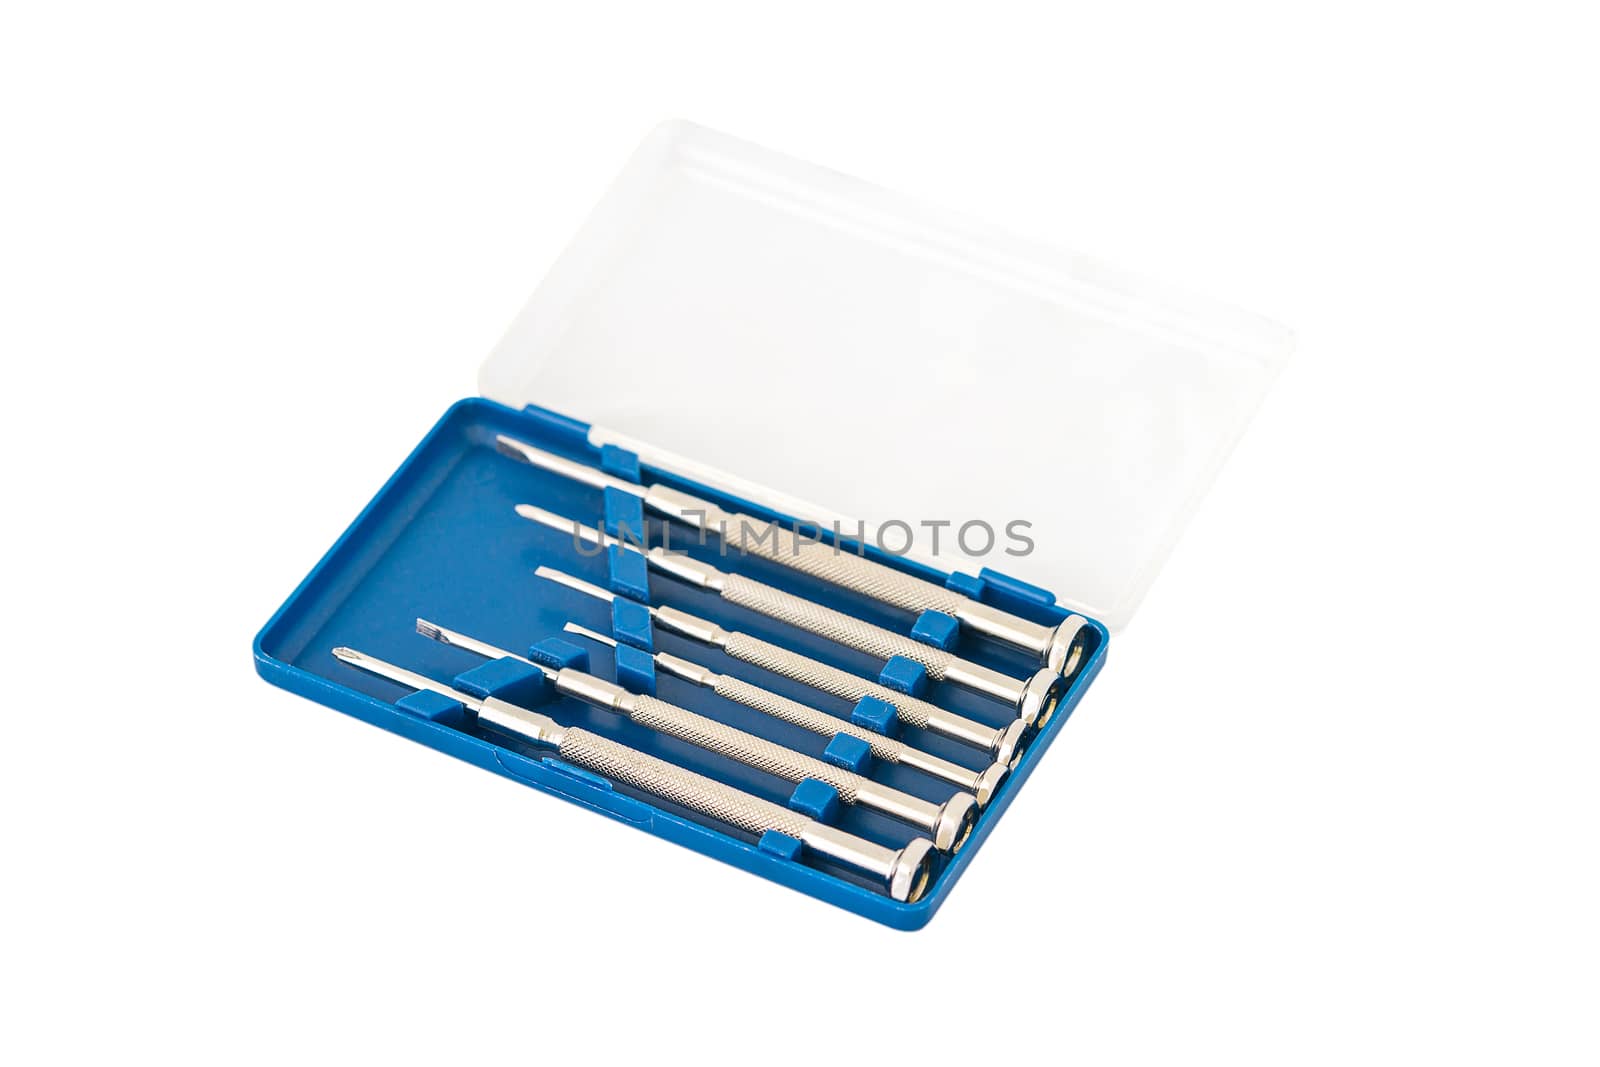 Screw Drivers in Box Set Isolated on White Background